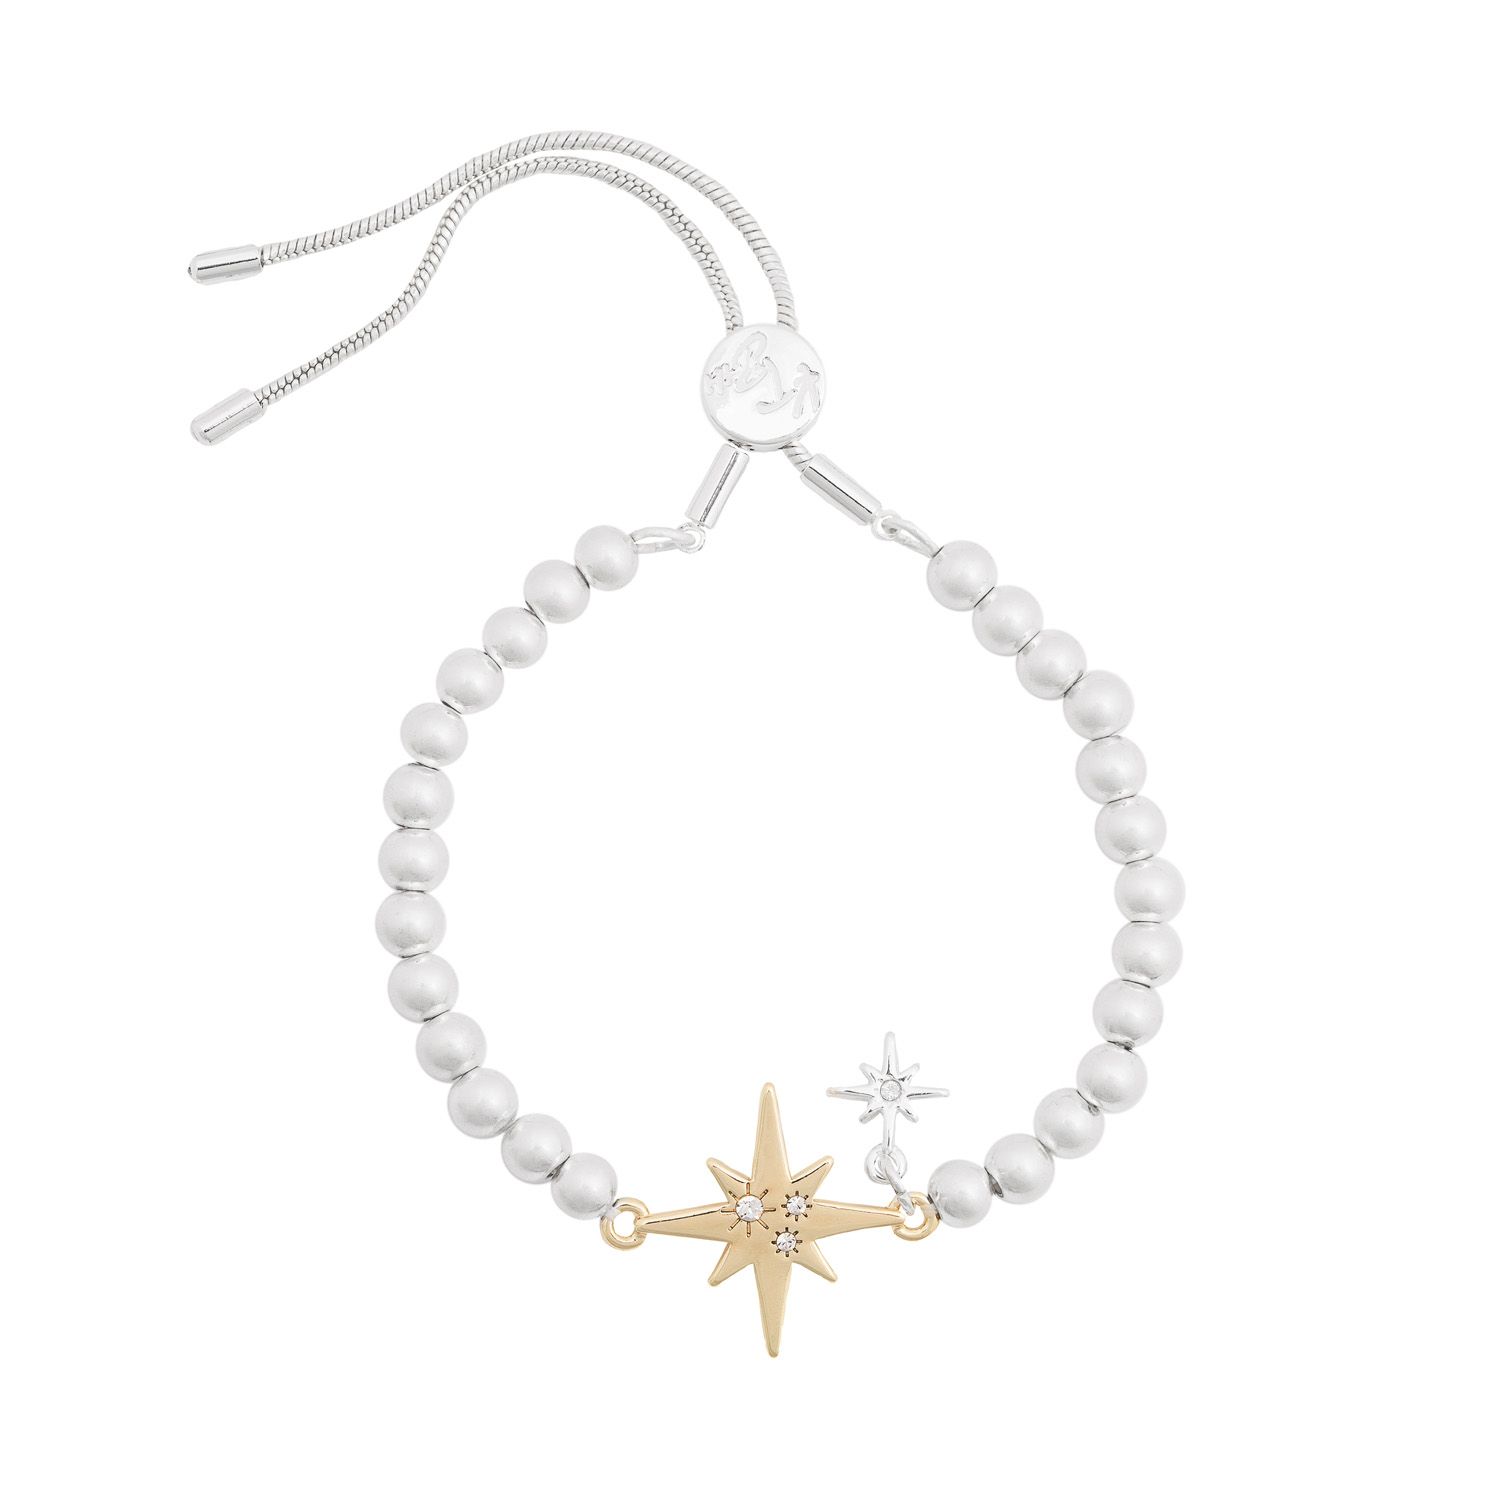 This easy-to-wear silver bracelet features a sparkly gold star charm – the North Star, a symbol of hope and inspiration, helping to guide you on your way through life. On the reverse, the affirmation ‘Be You’ is engraved, making it the perfect gift for friends – or for yourself! It features a sliding clasp, so is easily adjusted, whatever the size of your wrist. Wear alone or as part of a bracelet stack with our other KTxBibi bracelets for a real style statement.